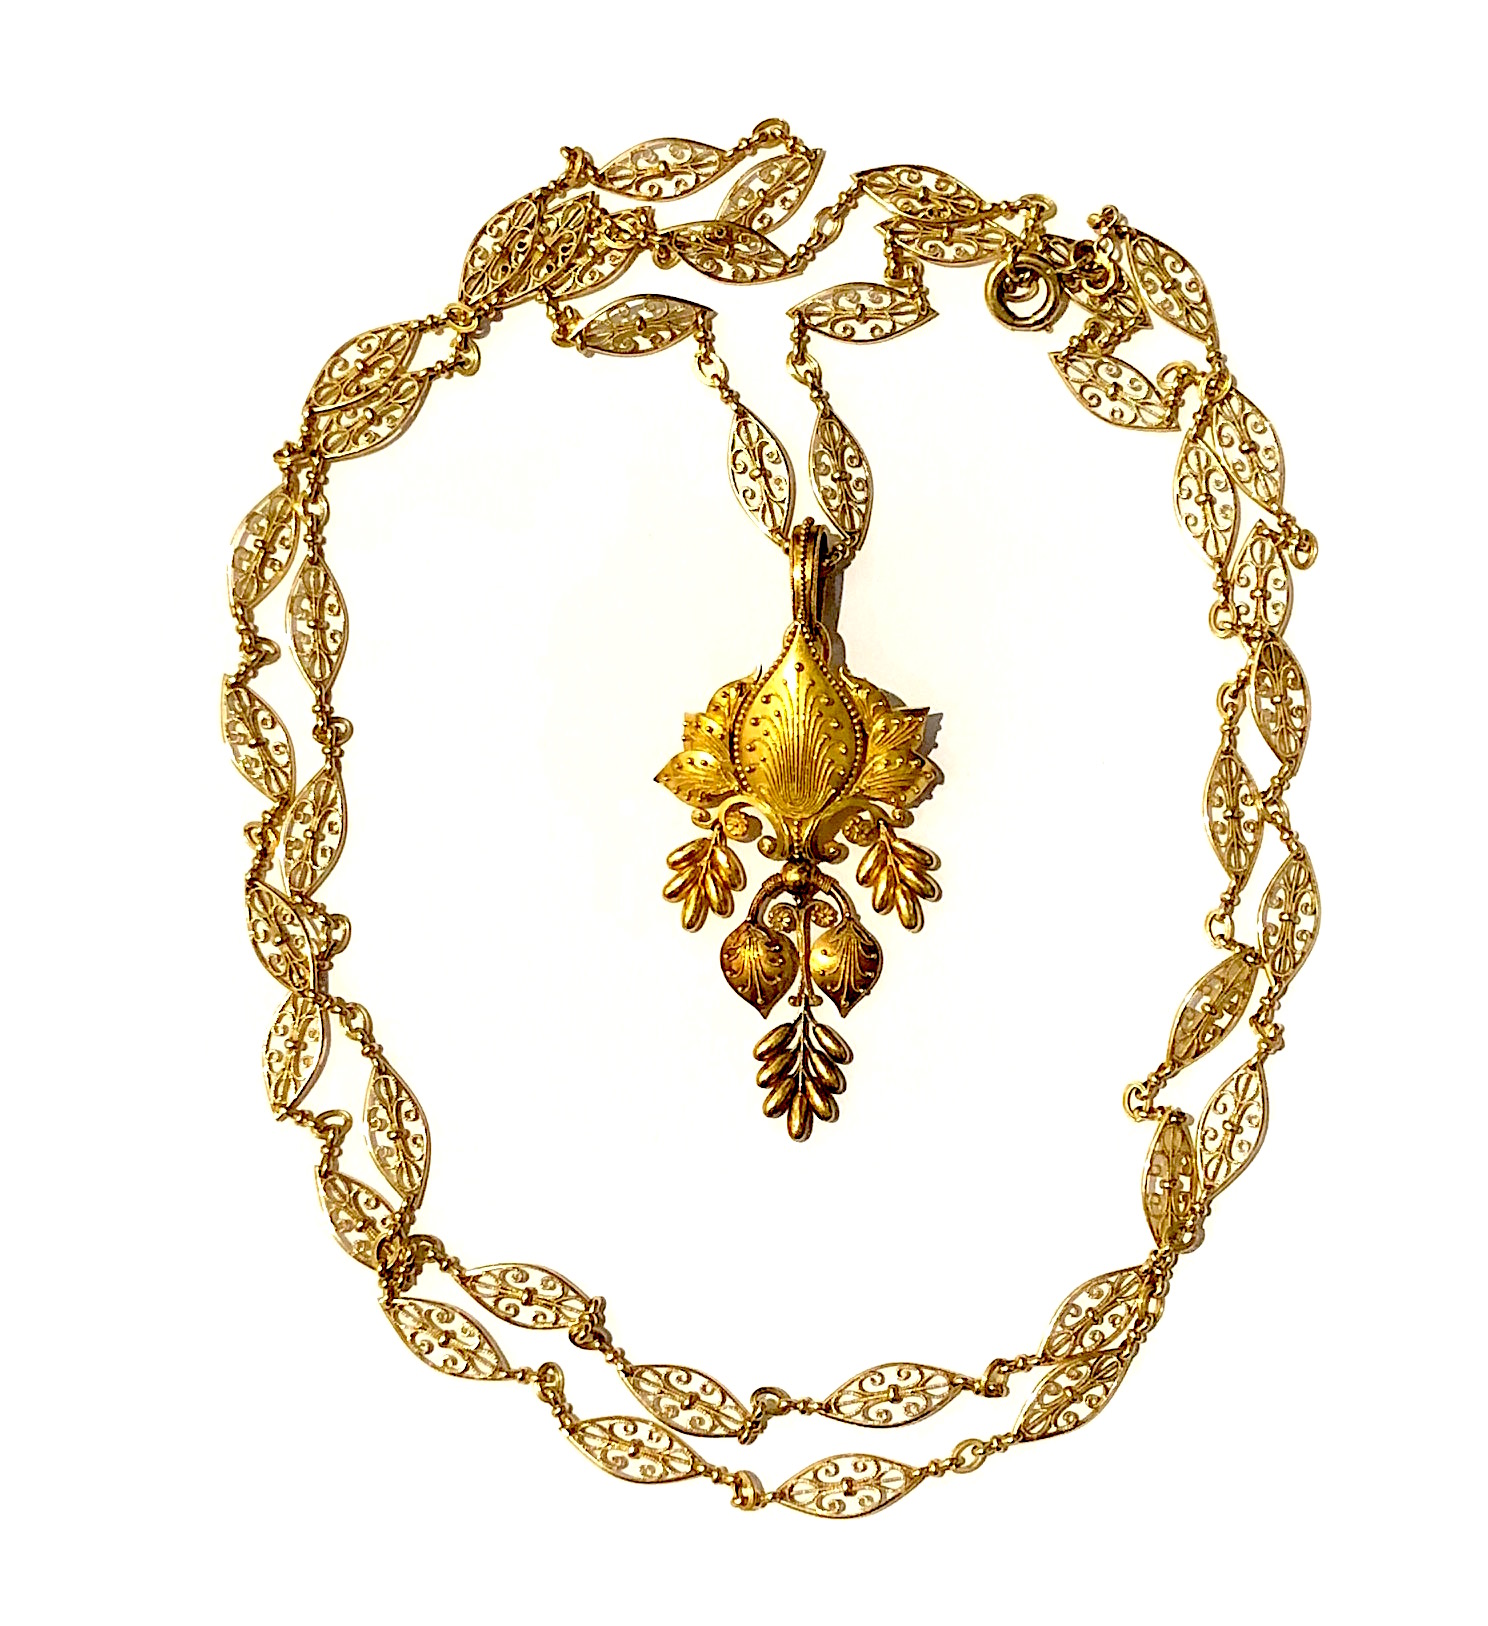 Eugene Fontenay (1823-1887) “Wisteria” brooch and fitted with original pendant attachment in 18k gold with extremely fine detailing, superb granulation and hanging pendant blossoms, marked: EF in a diamond poincon (the mark of Eugene Fontenay), French Eagle’s head touchmark for 18k gold (2x), c.1875